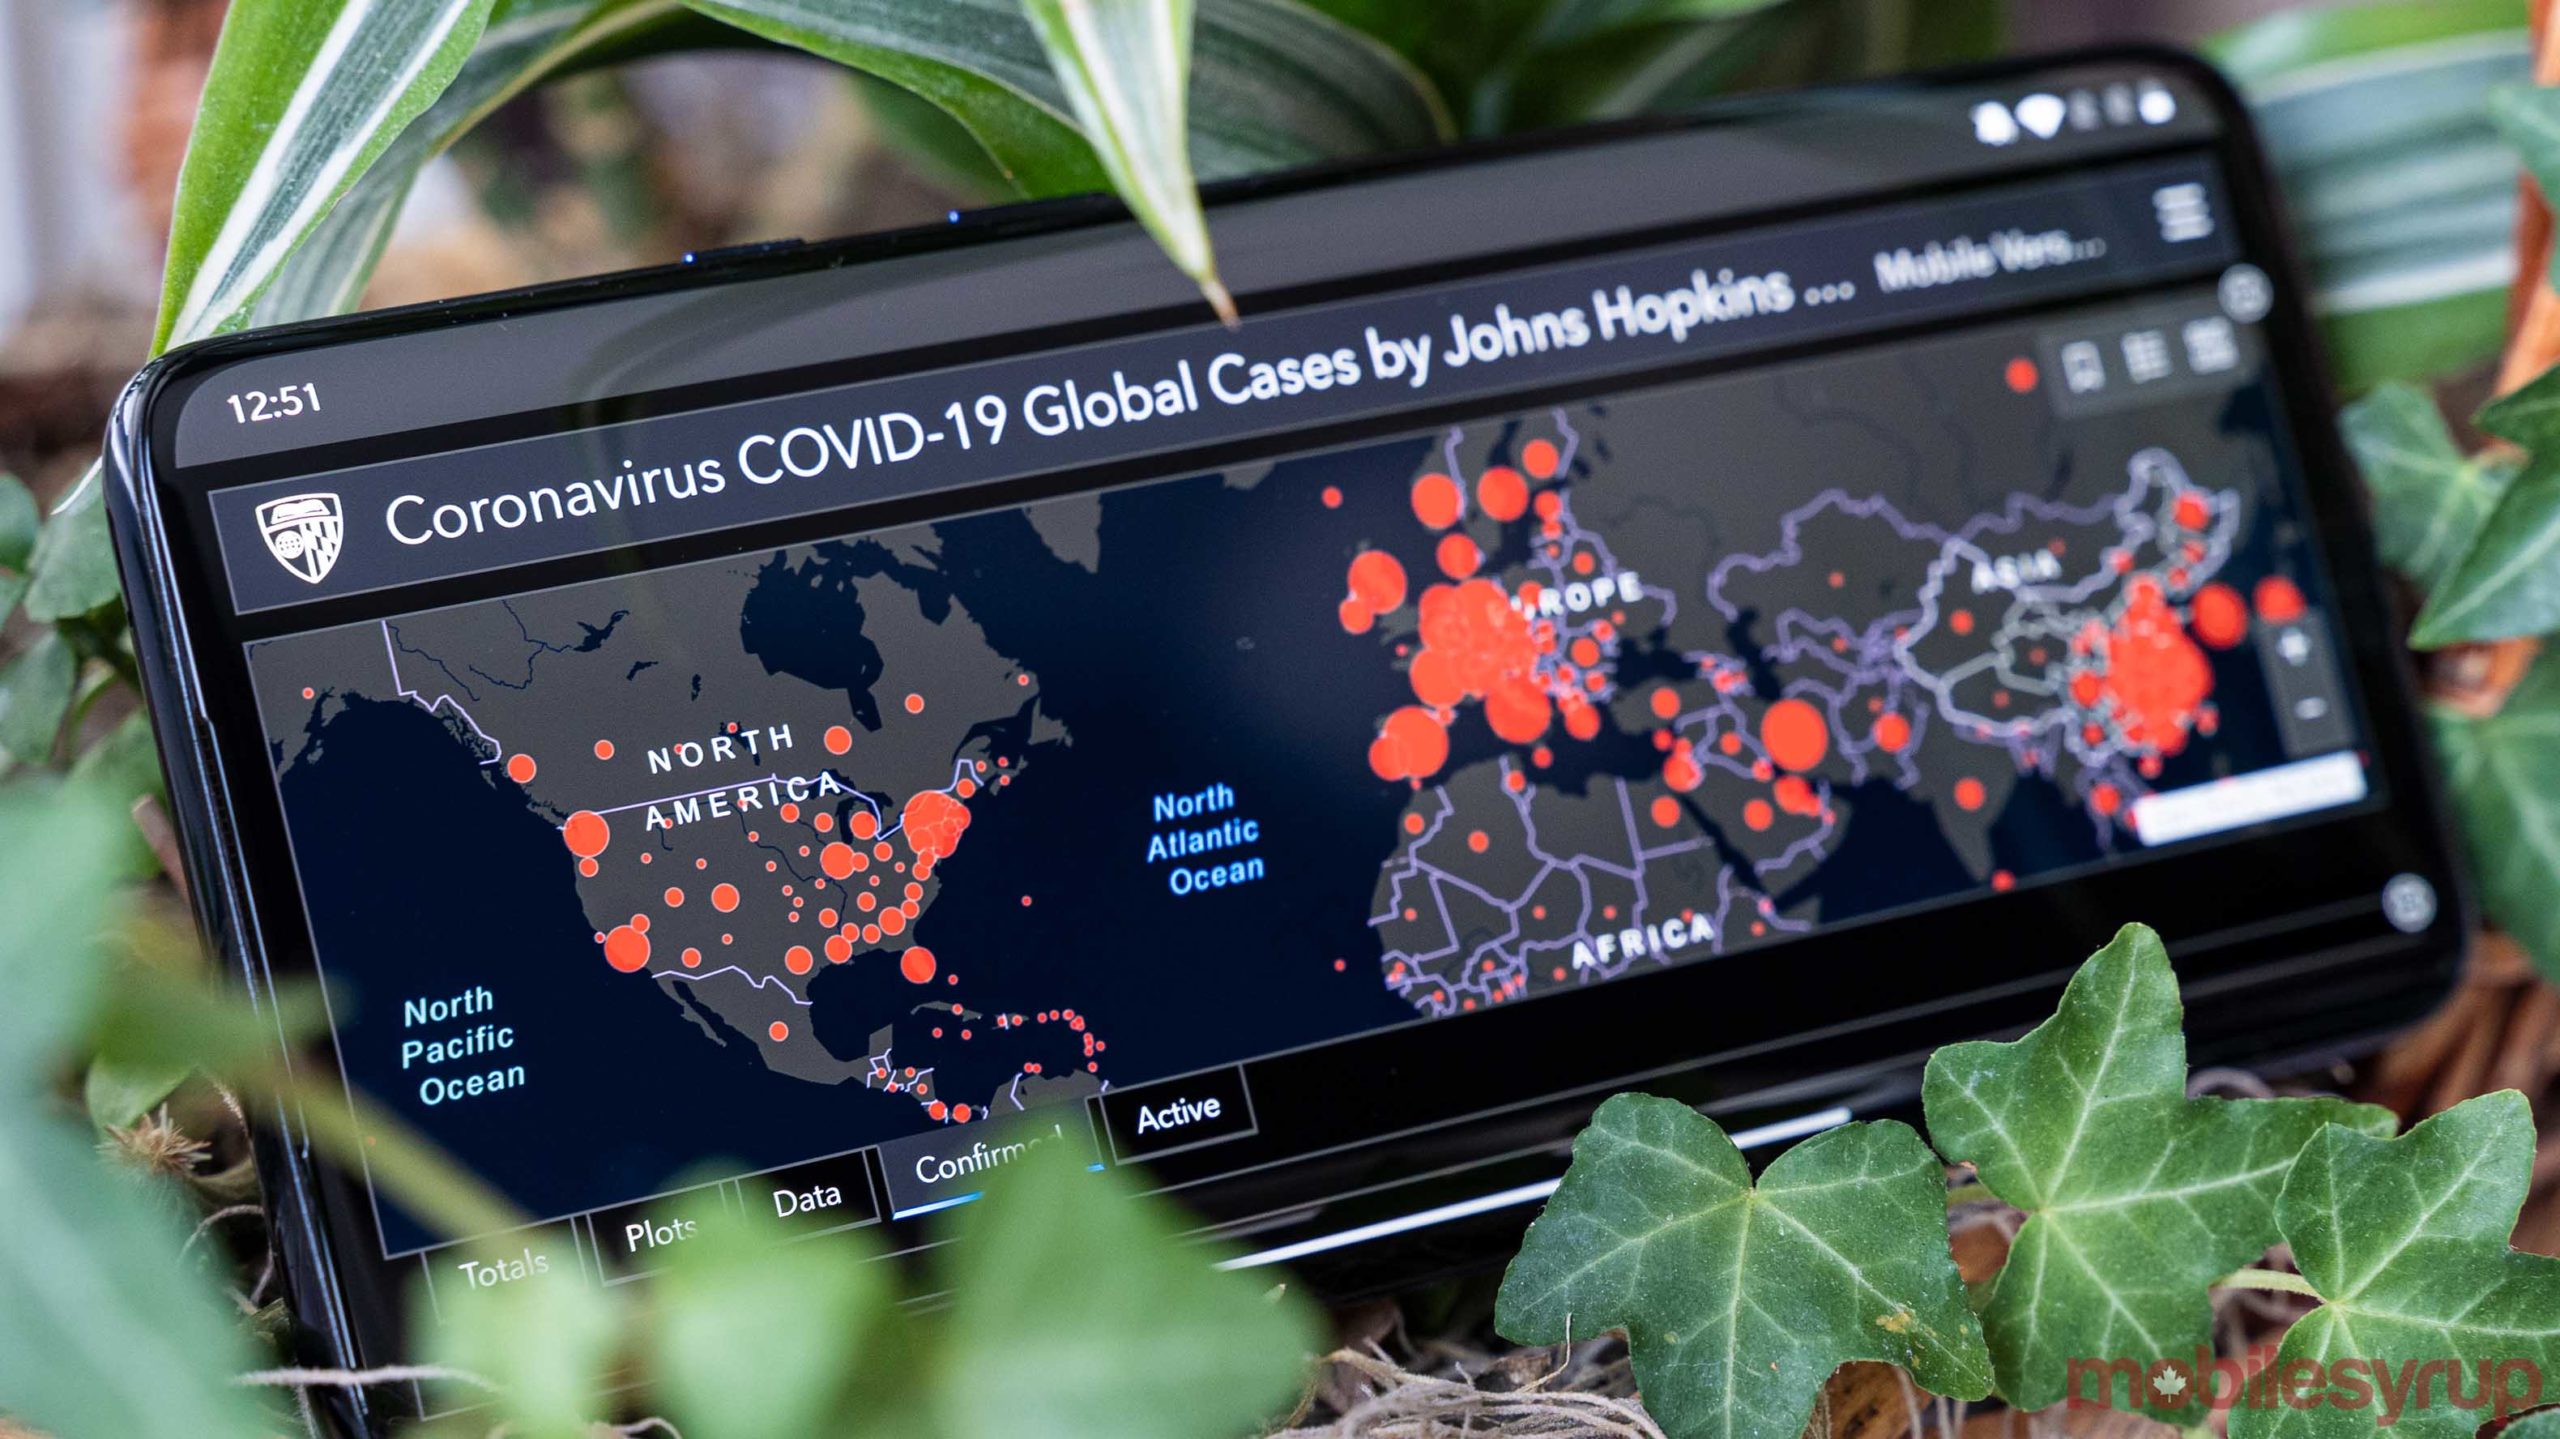 COVID-19 global cases